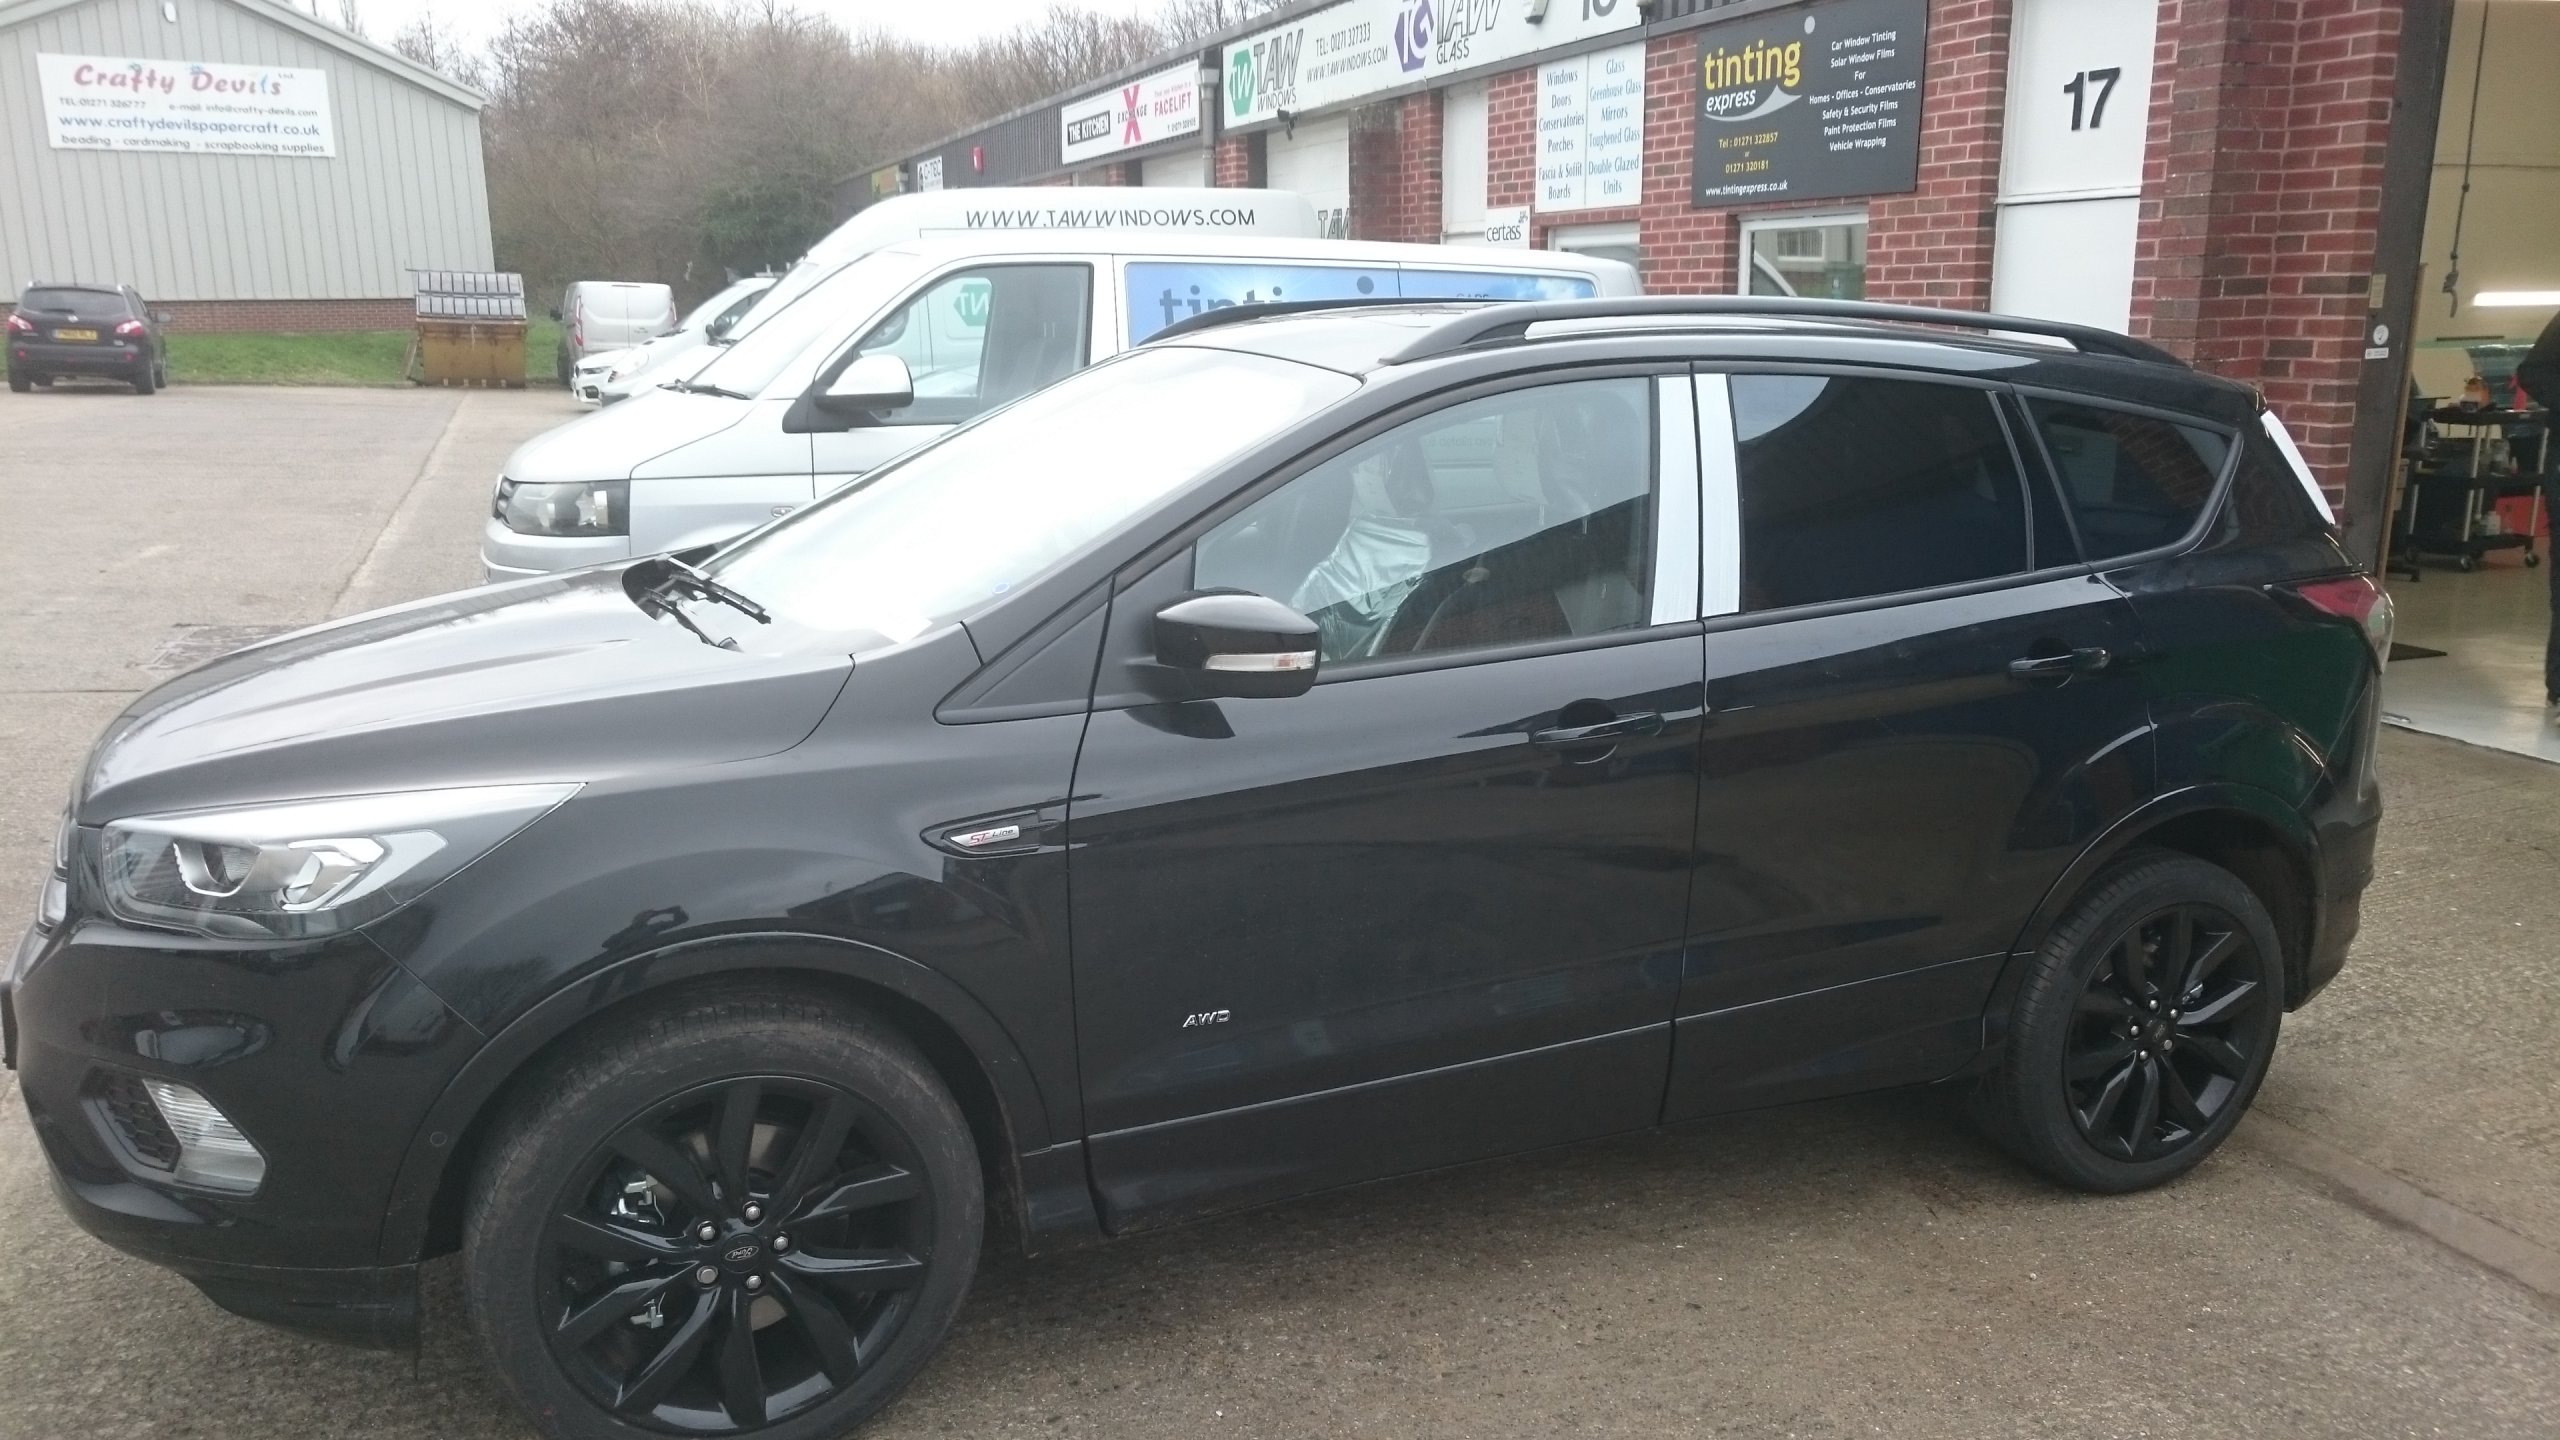 Ford Kuga fitted with Llumar ATC 20 window tints in Barnstaple by Tinting Express.